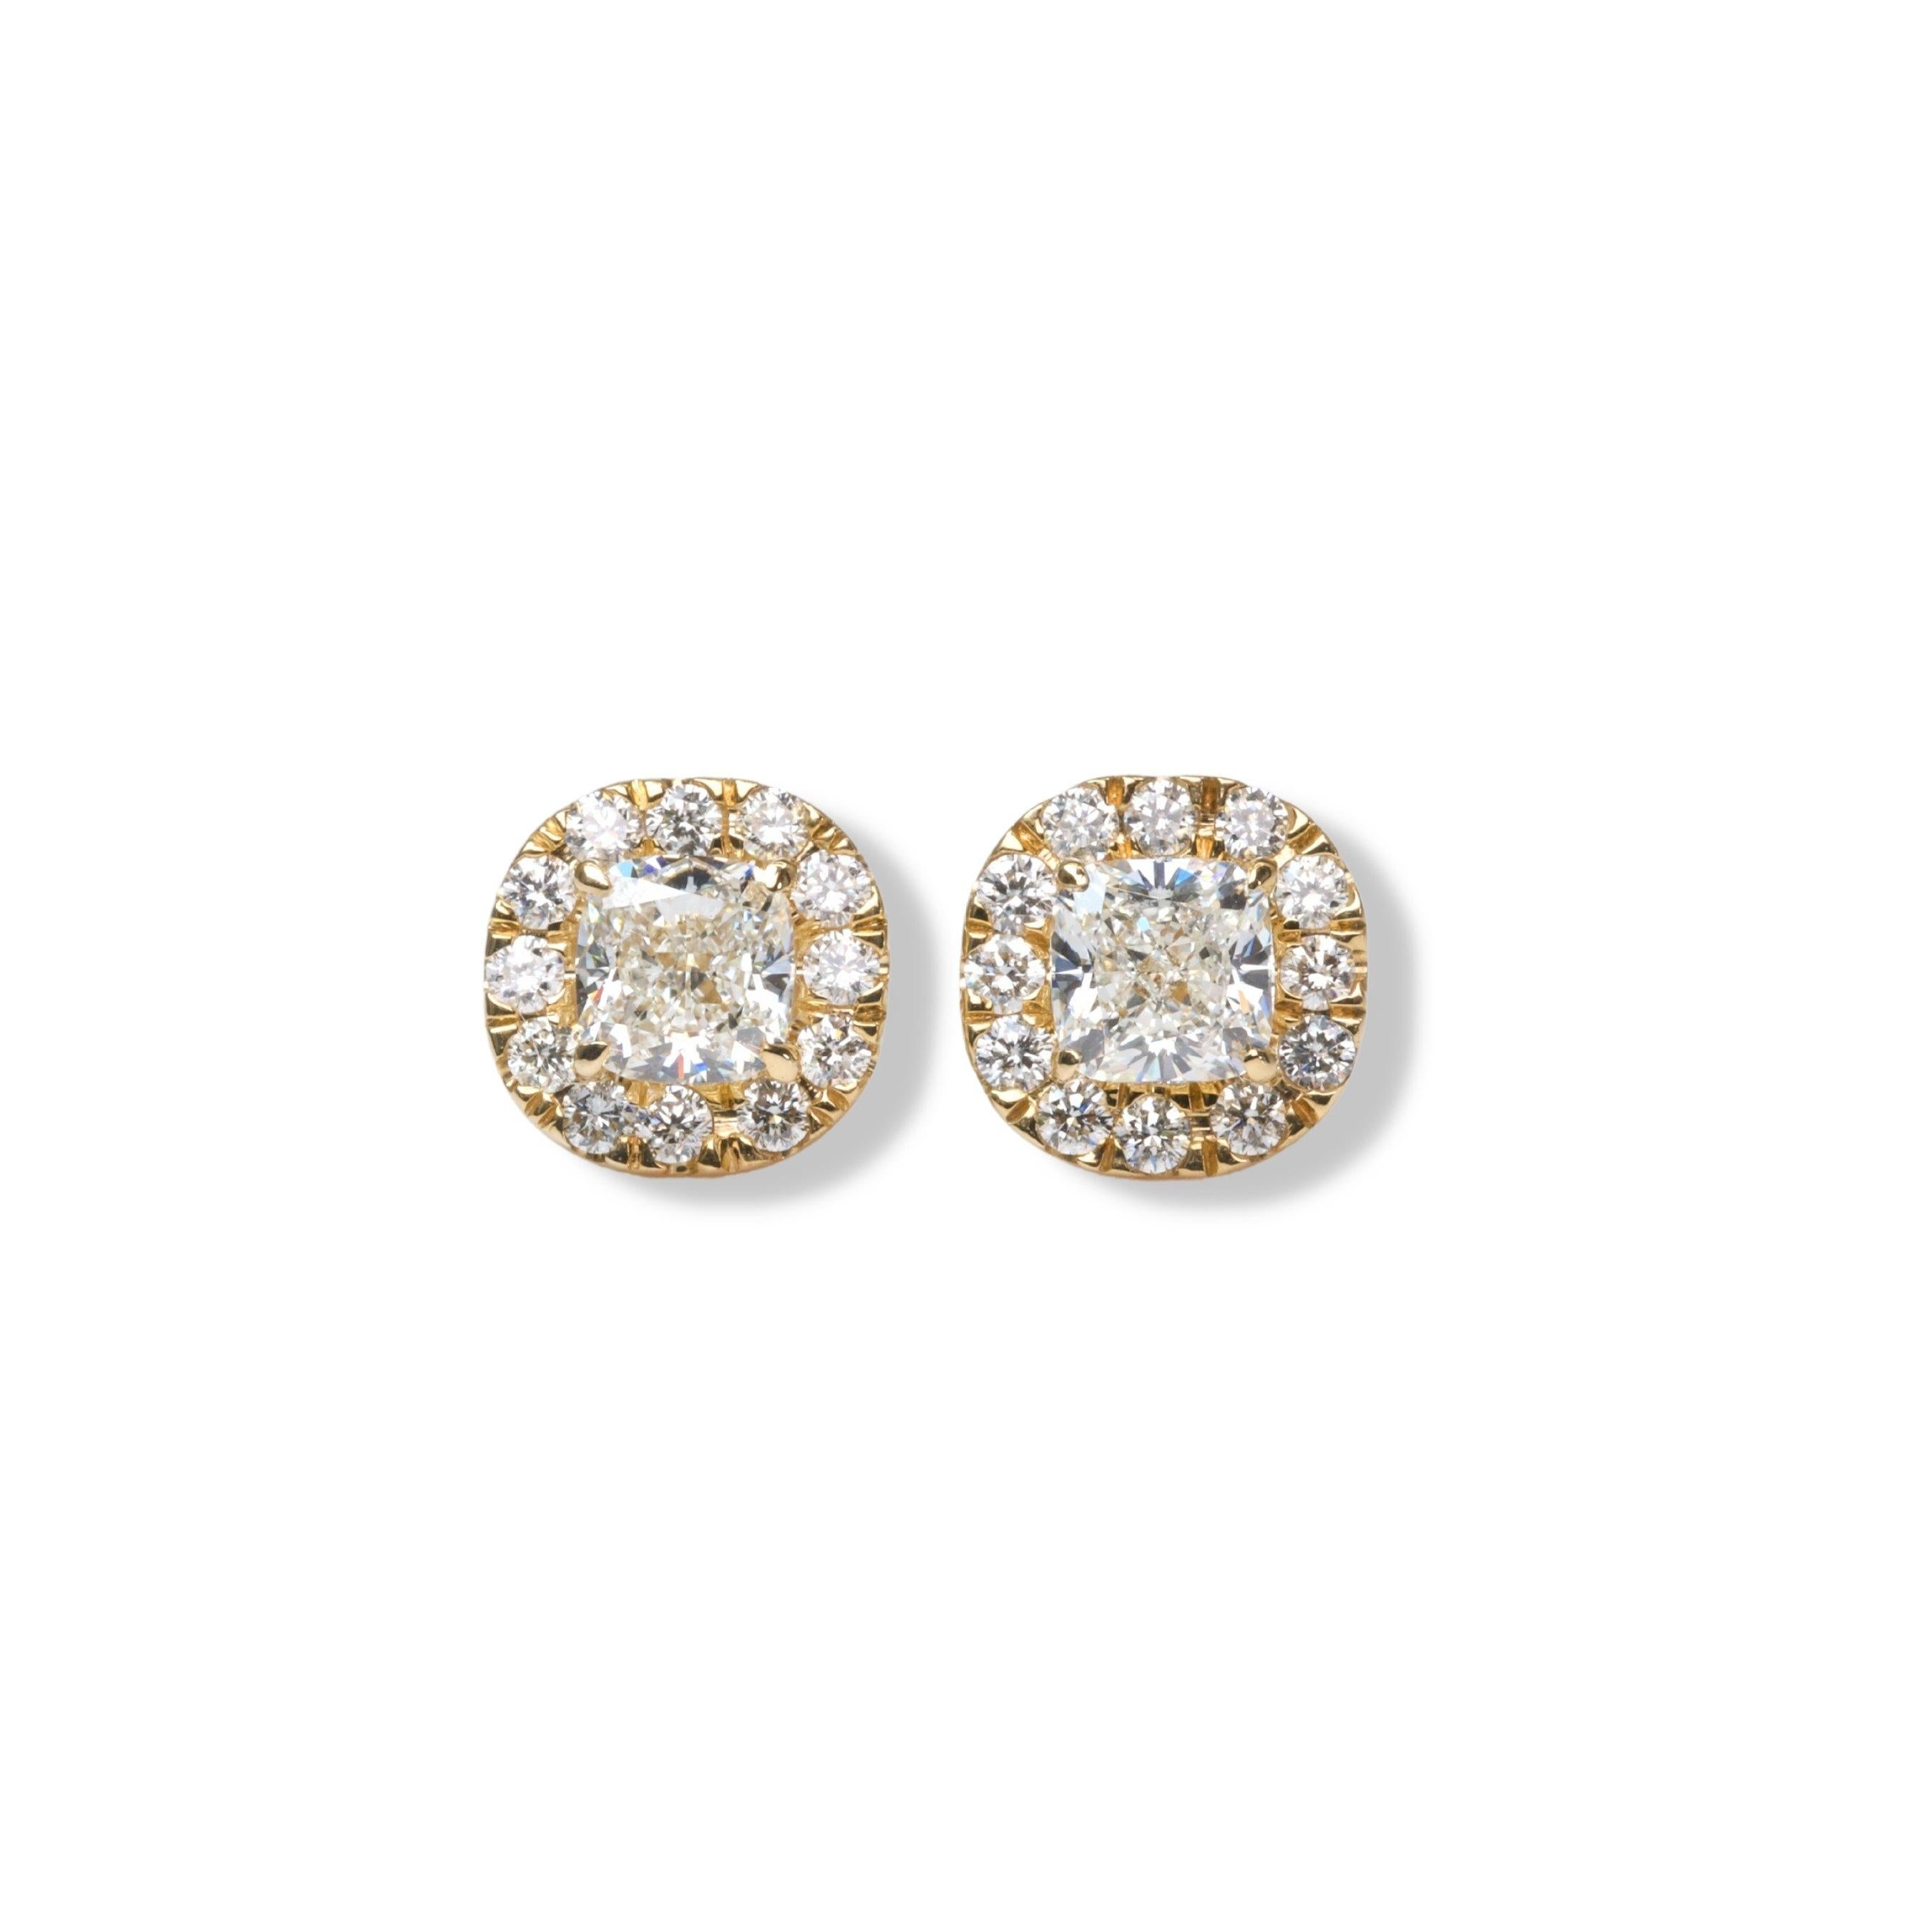 Sparkling 18k Yellow Gold Stud Halo Earrings with 1.40 Diamonds, GIA certificate For Sale 2